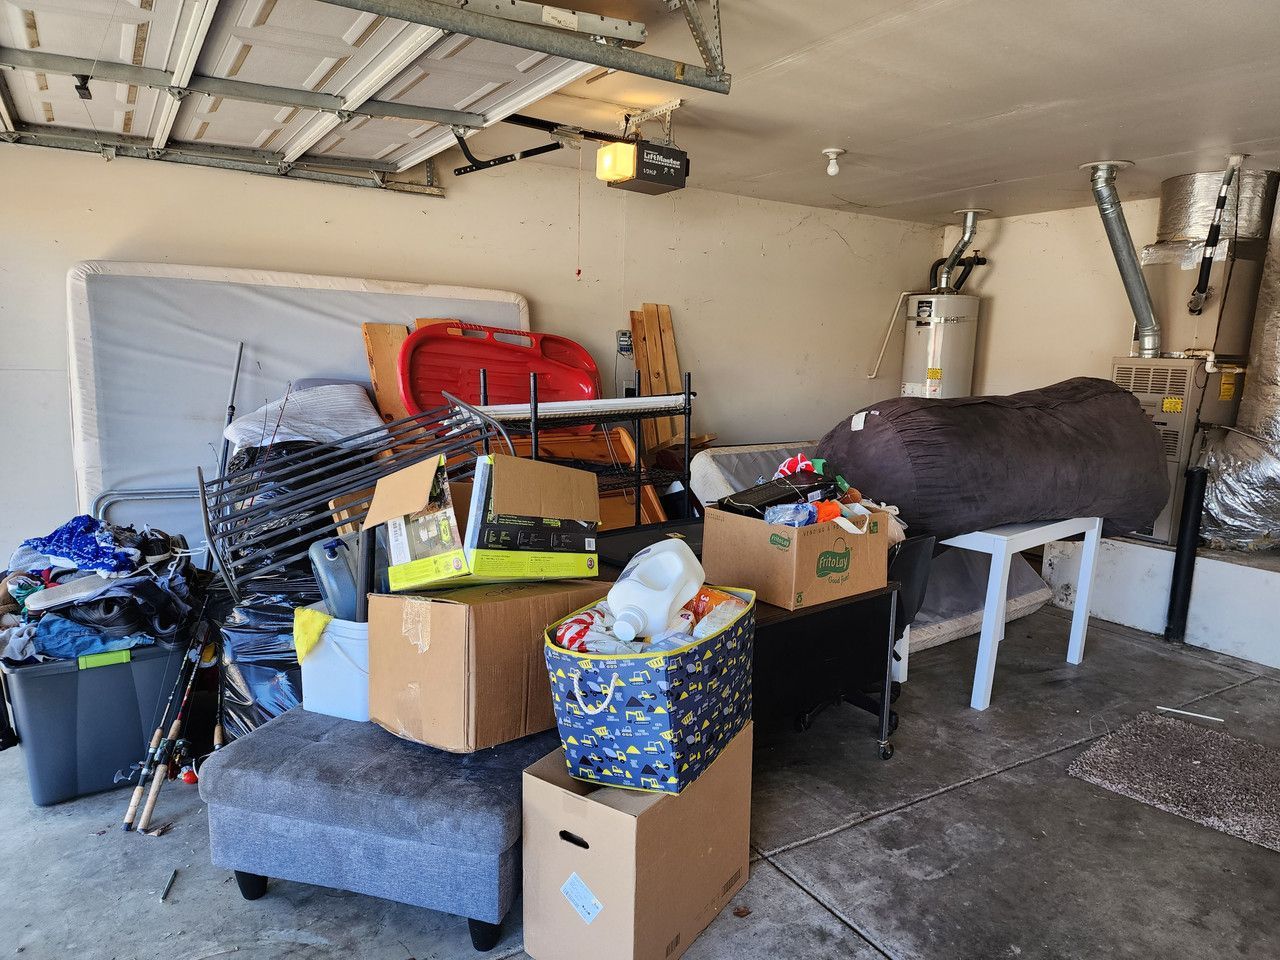 Garage filled with an assortment of household items including mattresses, fishing poles, stacked boxes, and miscellaneous clutter, representing a space in need of cleanout.